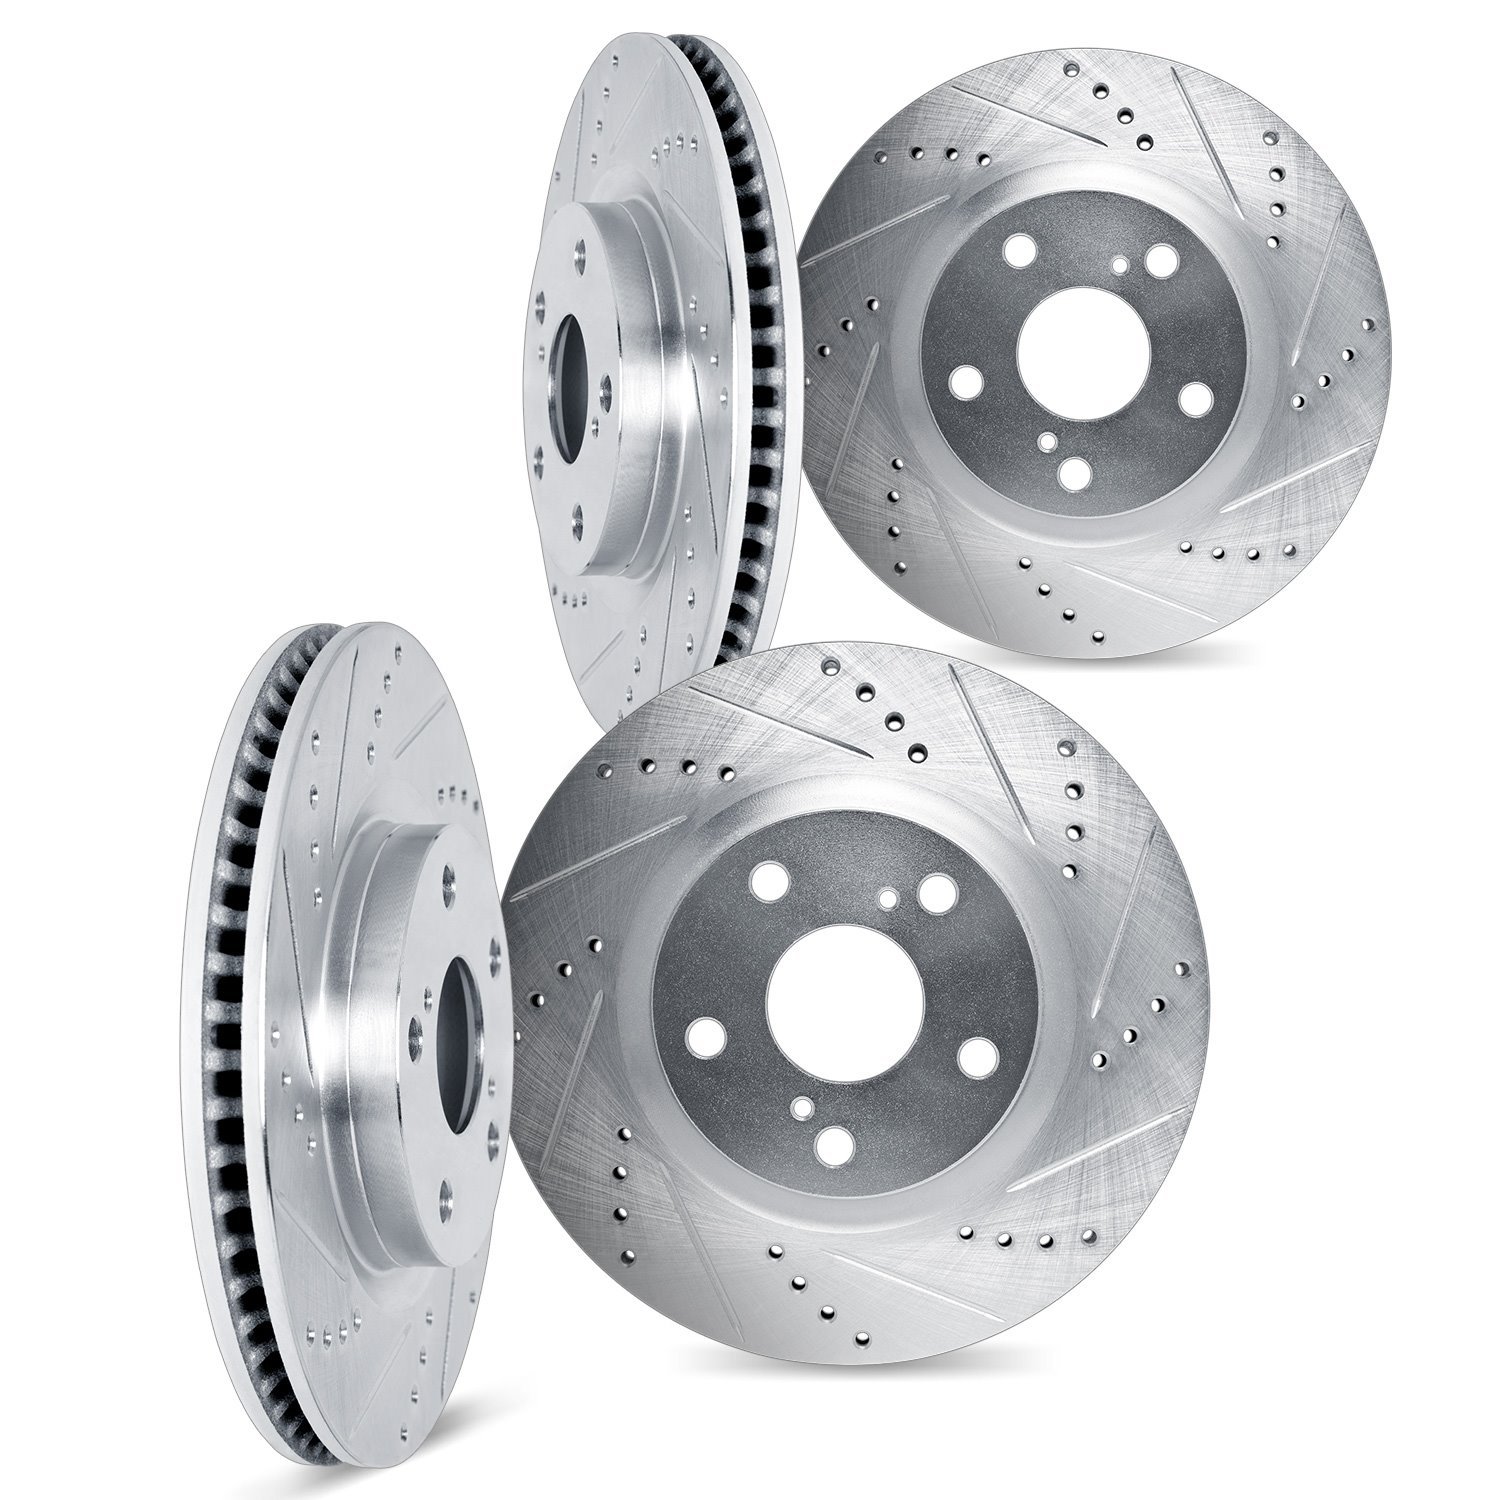 7004-47106 Drilled/Slotted Brake Rotors [Silver], Fits Select GM, Position: Front and Rear